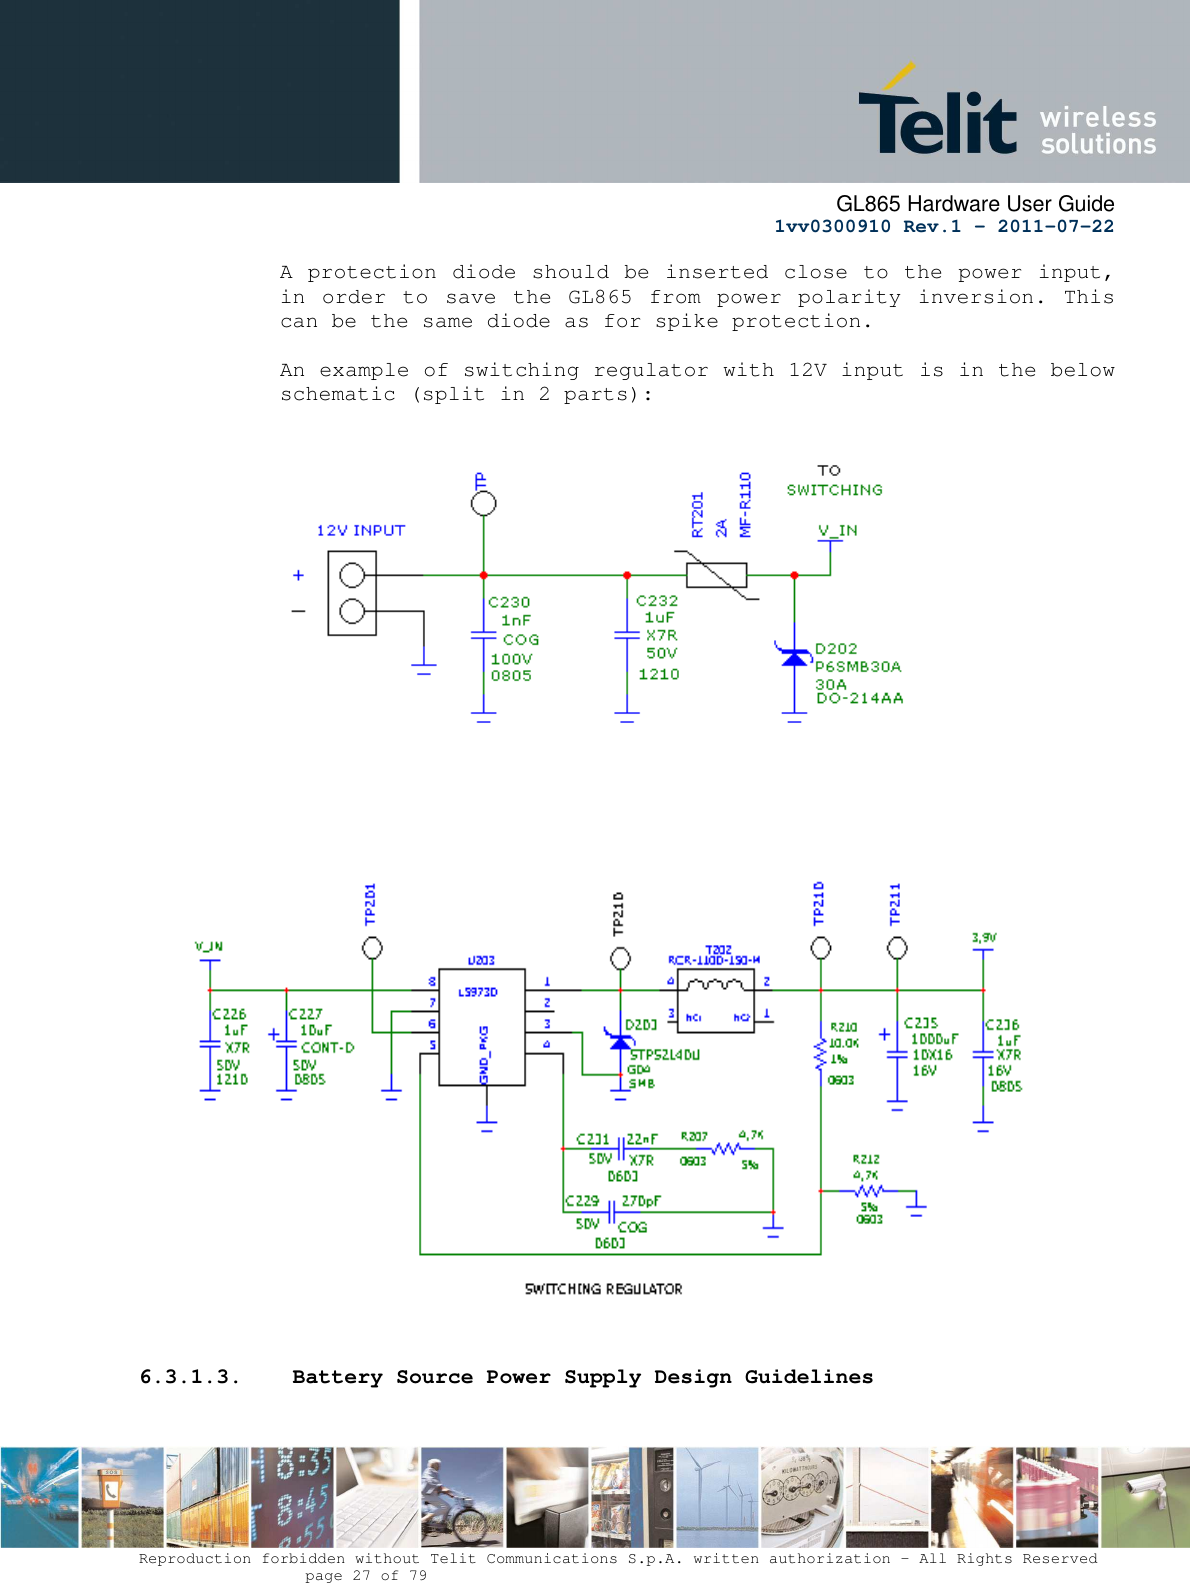      GL865 Hardware User Guide     1vv0300910 Rev.1 – 2011-07-22       Reproduction forbidden without Telit Communications S.p.A. written authorization - All Rights Reserved    page 27 of 79  A protection diode should be inserted close to the power input, in  order to  save  the  GL865  from  power polarity  inversion. This can be the same diode as for spike protection.  An example of switching regulator with 12V input is in the below schematic (split in 2 parts):                             6.3.1.3.  Battery Source Power Supply Design Guidelines  